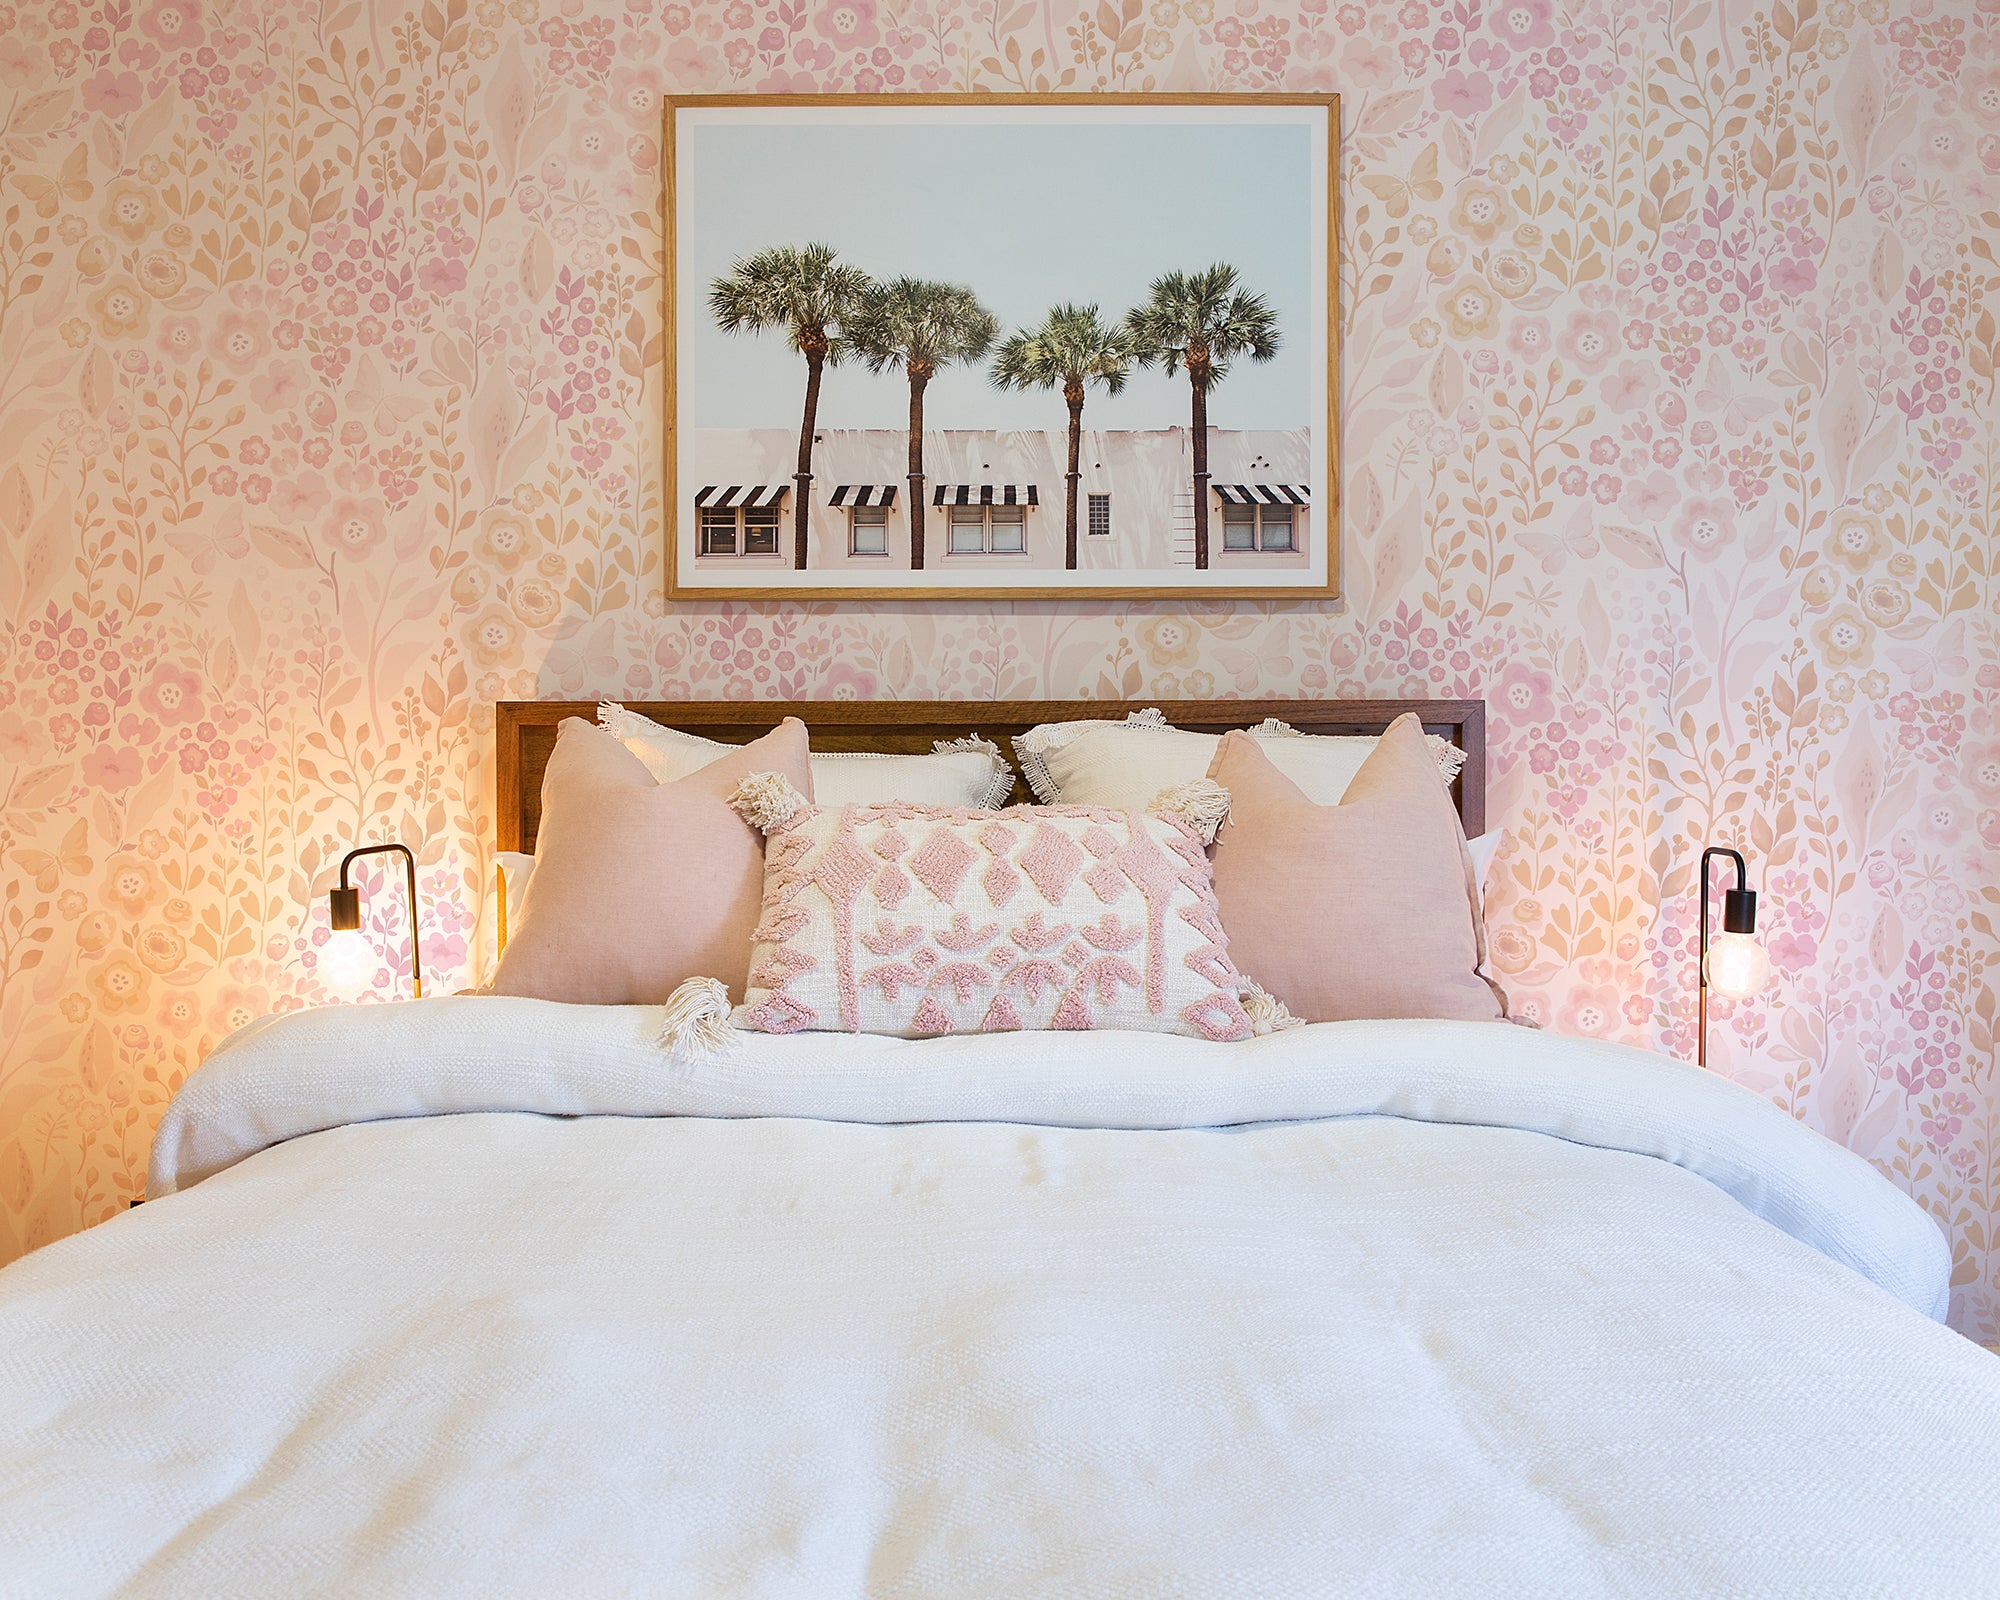 A charming bedroom adorned with 'Pretty Petals Wallpaper' creating a soft, romantic backdrop behind a bed dressed in white linens. The decor is completed with pink throw pillows, elegant bedside lamps, and a framed photograph of palm trees.